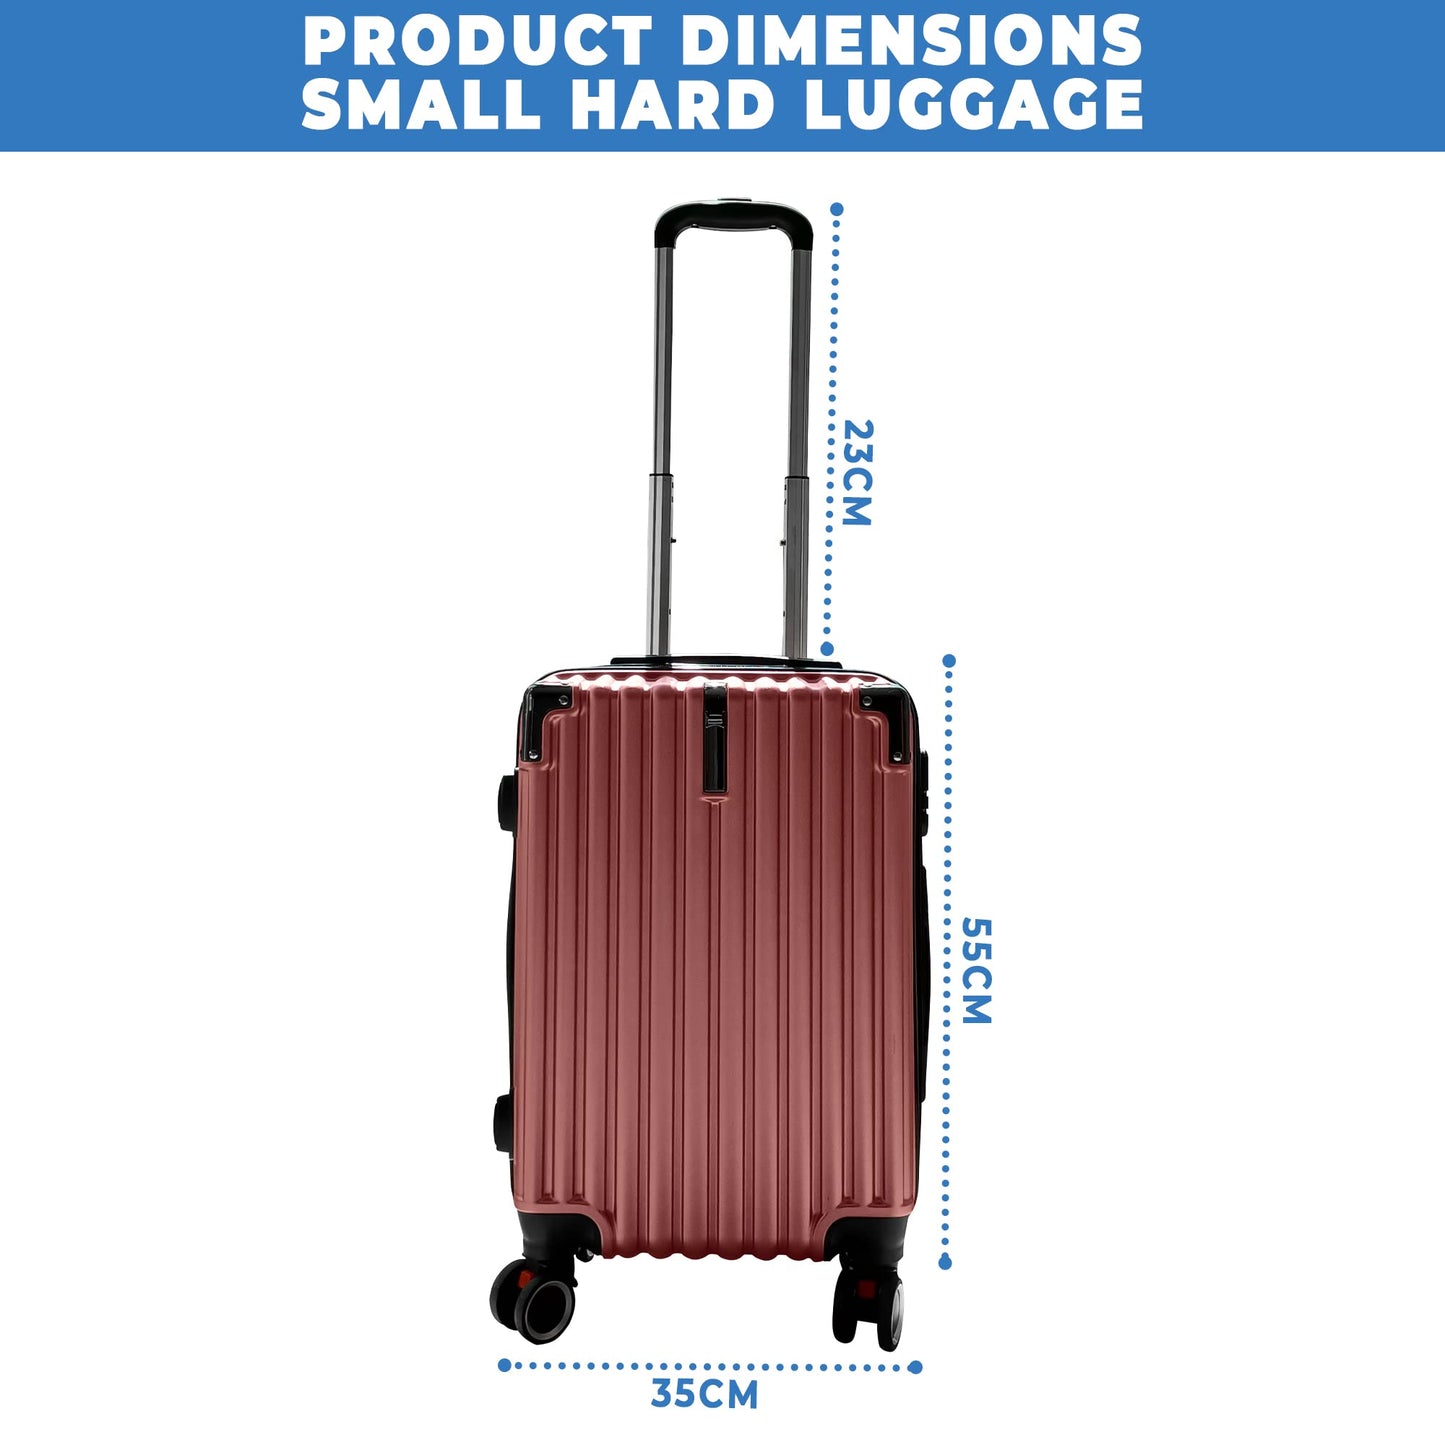 Carry on travel luggage (size 20) fashionable Hard-shell (Hard side) trolley bag, with 360 spinner wheels, and extra protection or corners and sides. (Rose gold)